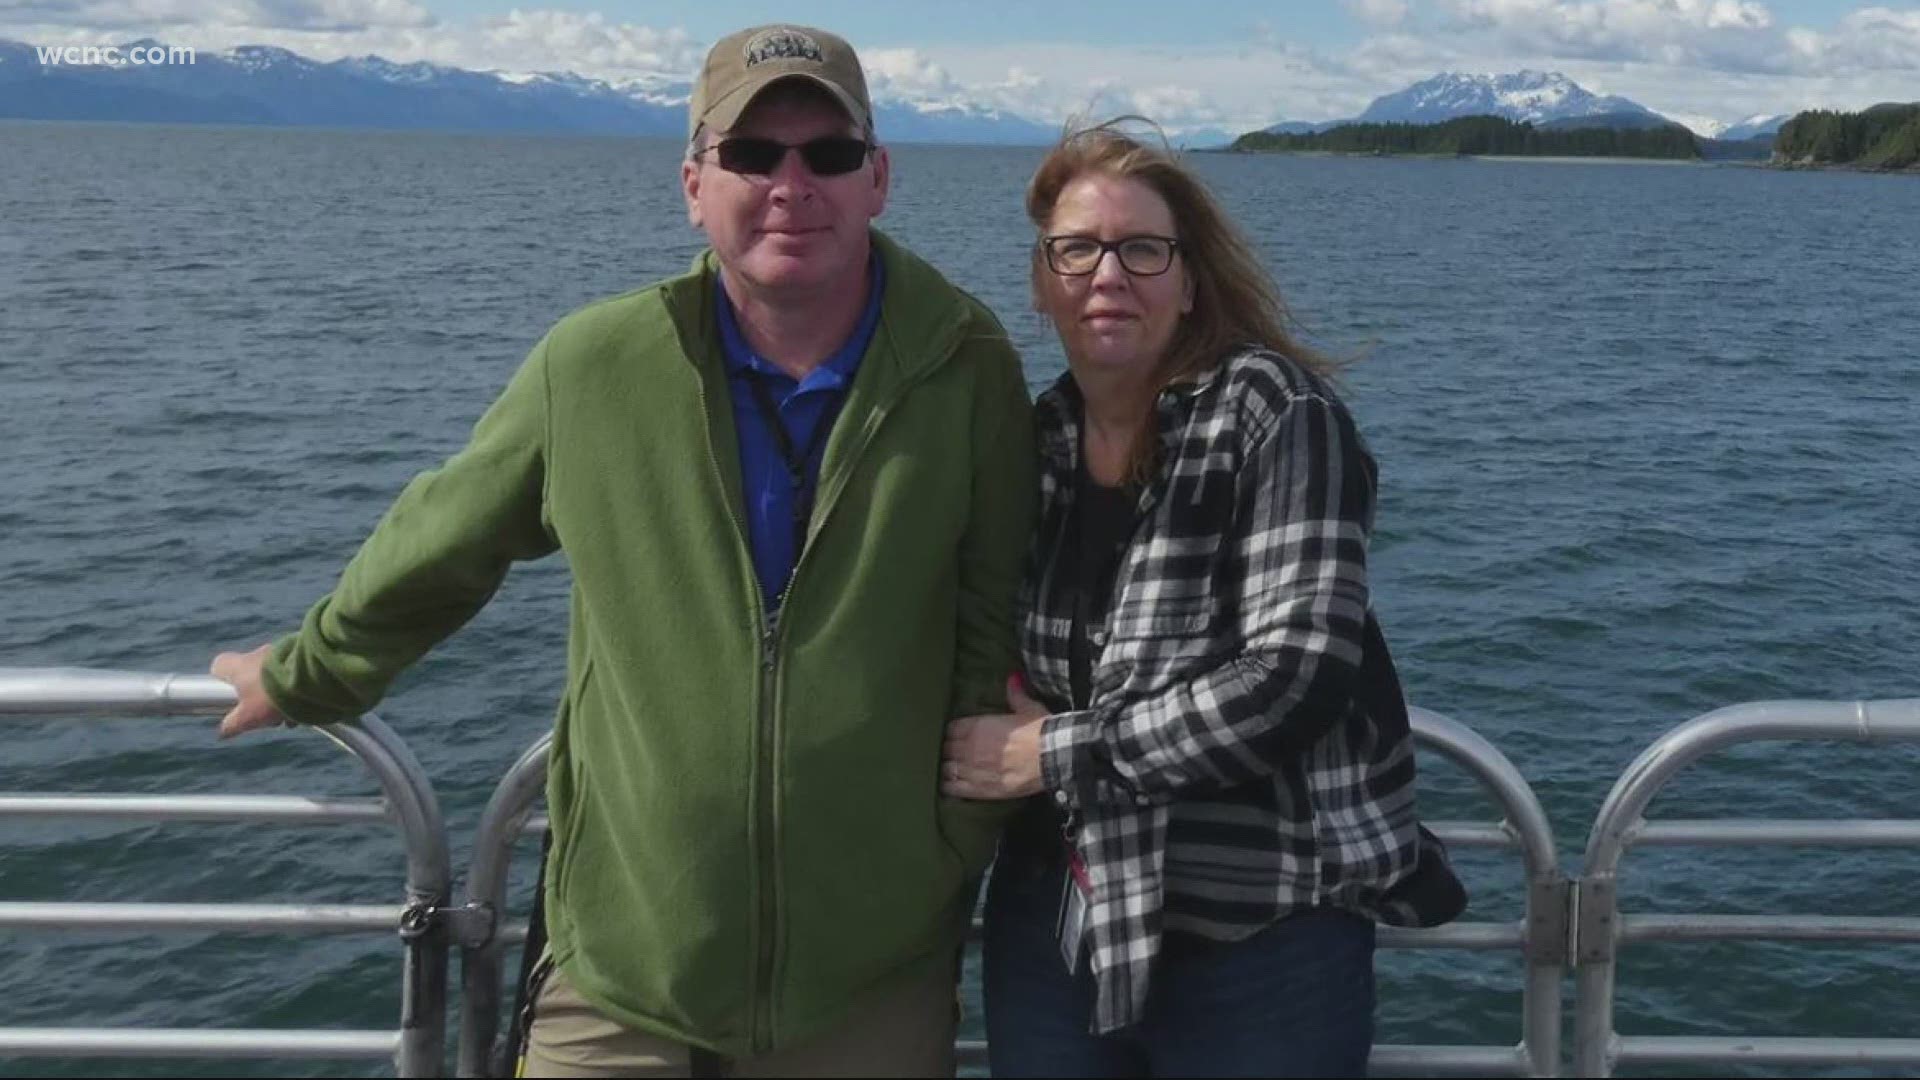 The North Carolina couple hasn't seen each other in 108 days & counting. Jeff is in North Carolina while Julie is in Nevada fighting for her life.